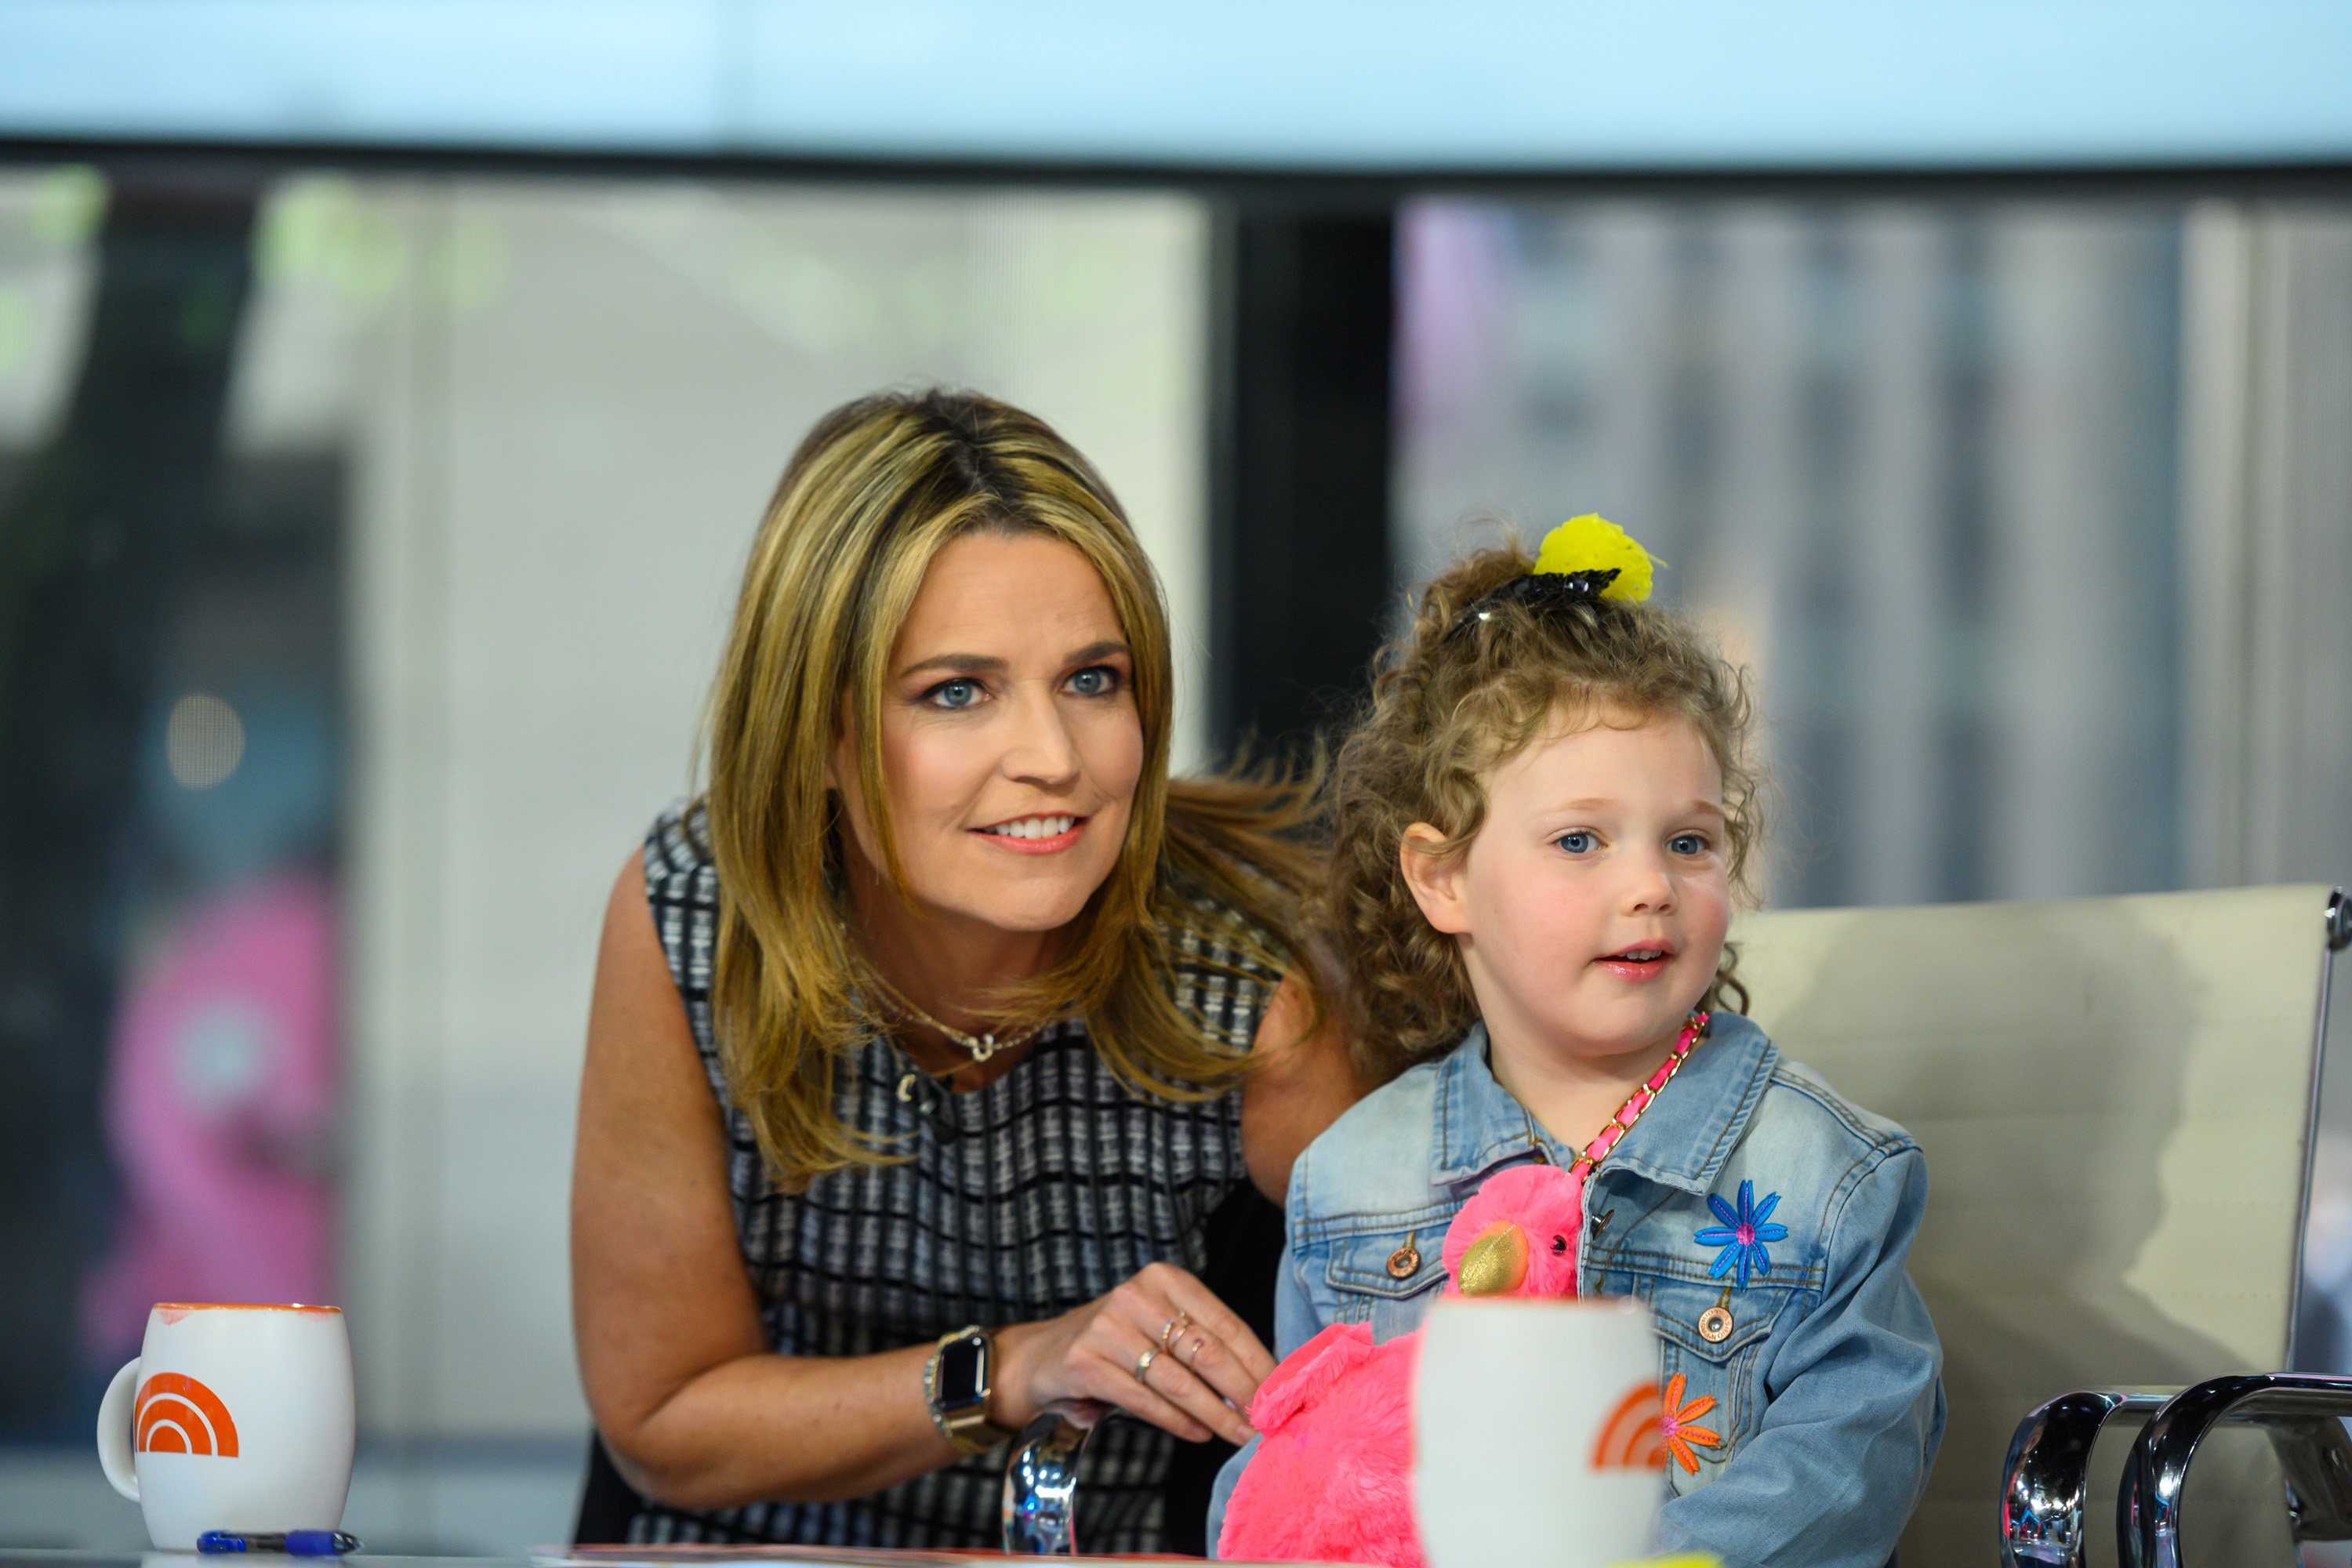 'Today Show's' Savannah Guthrie and daughter Vale